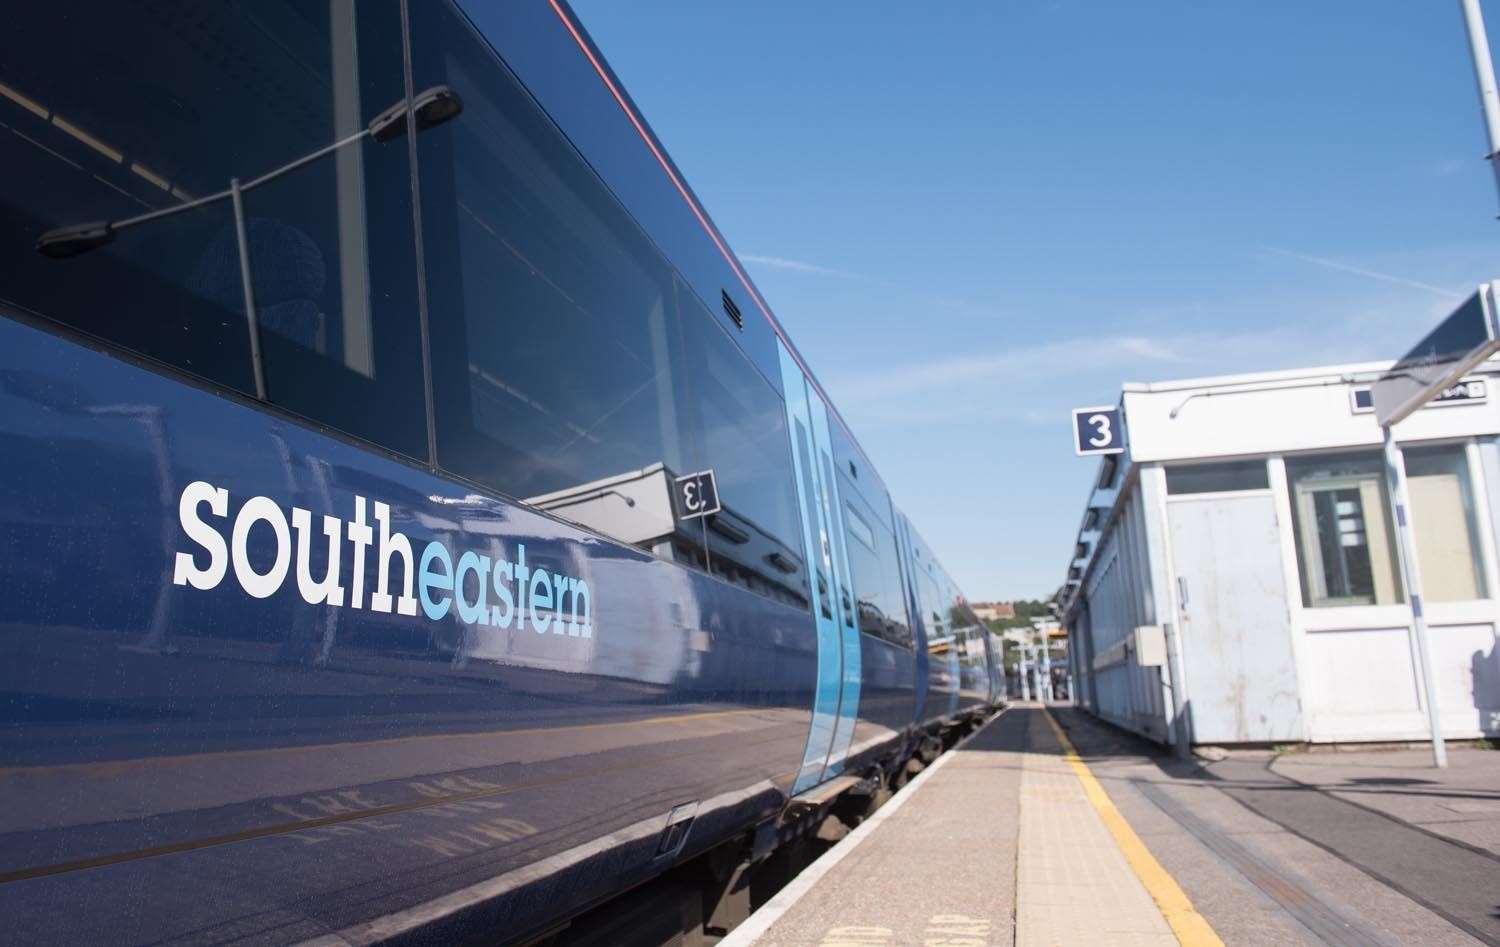 Southeastern train services in Kent will be impacted by the strike action